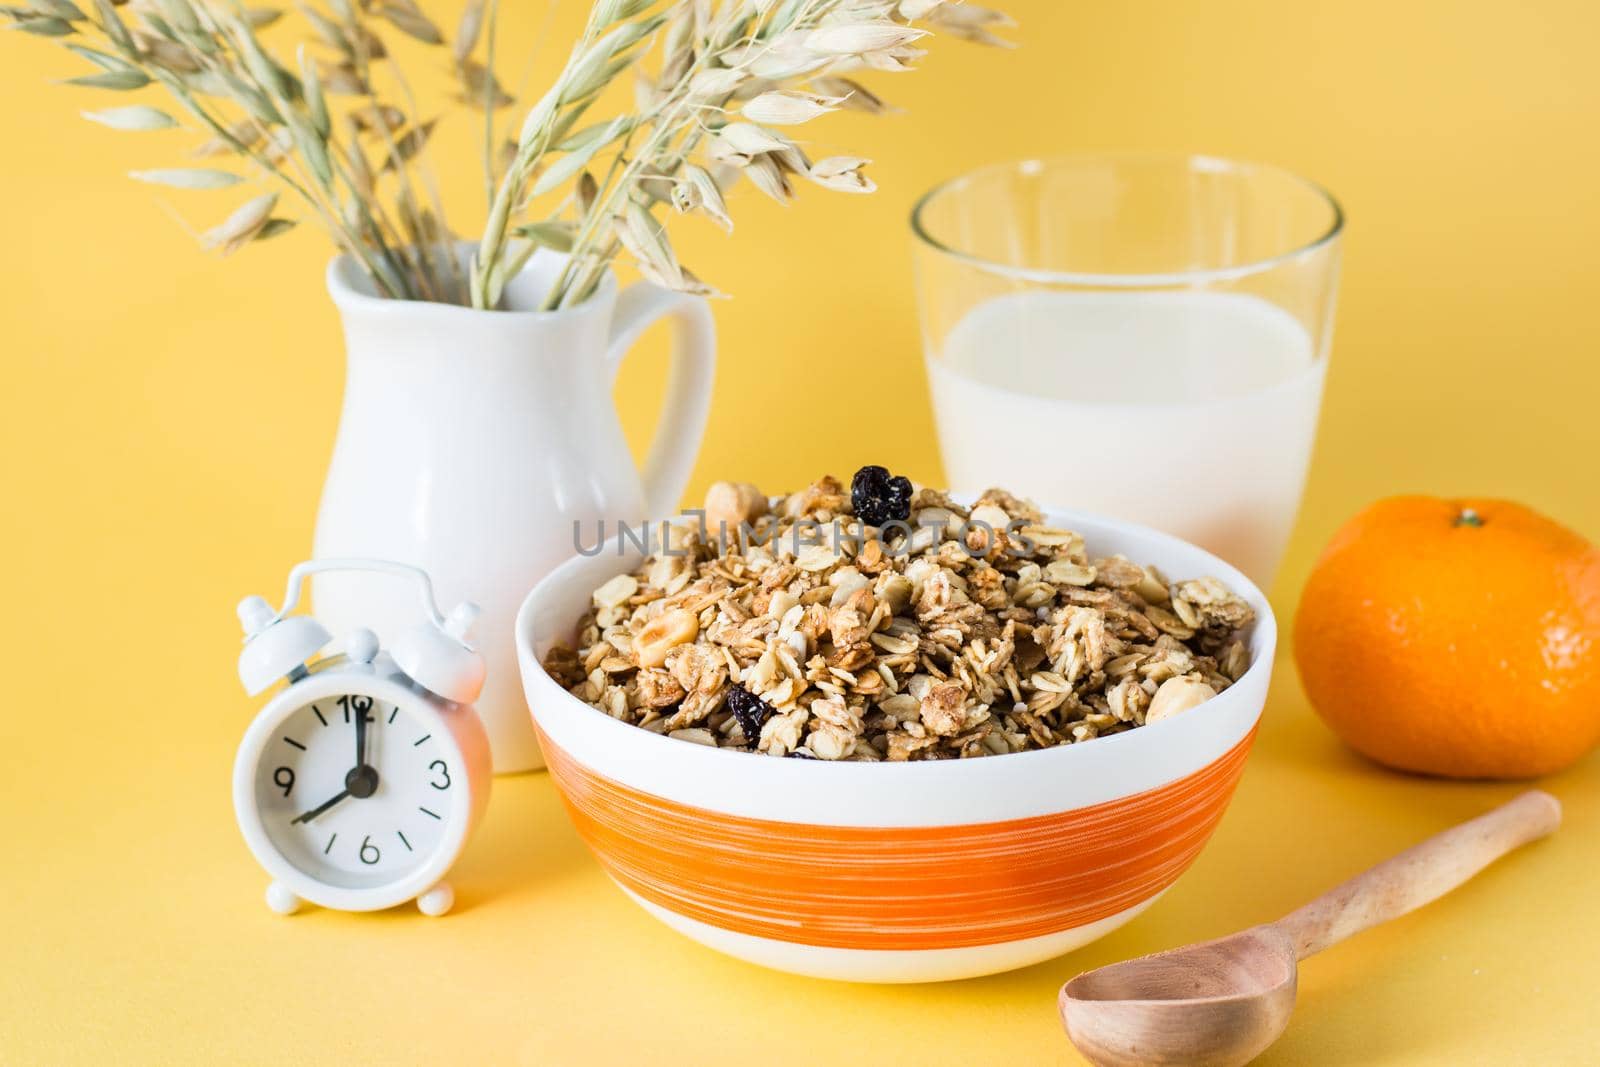 Healthy hearty breakfast. Baked granola of oats, nuts and raisins in a bowl, a glass of milk, an orange and an alarm clock on a yellow background by Aleruana